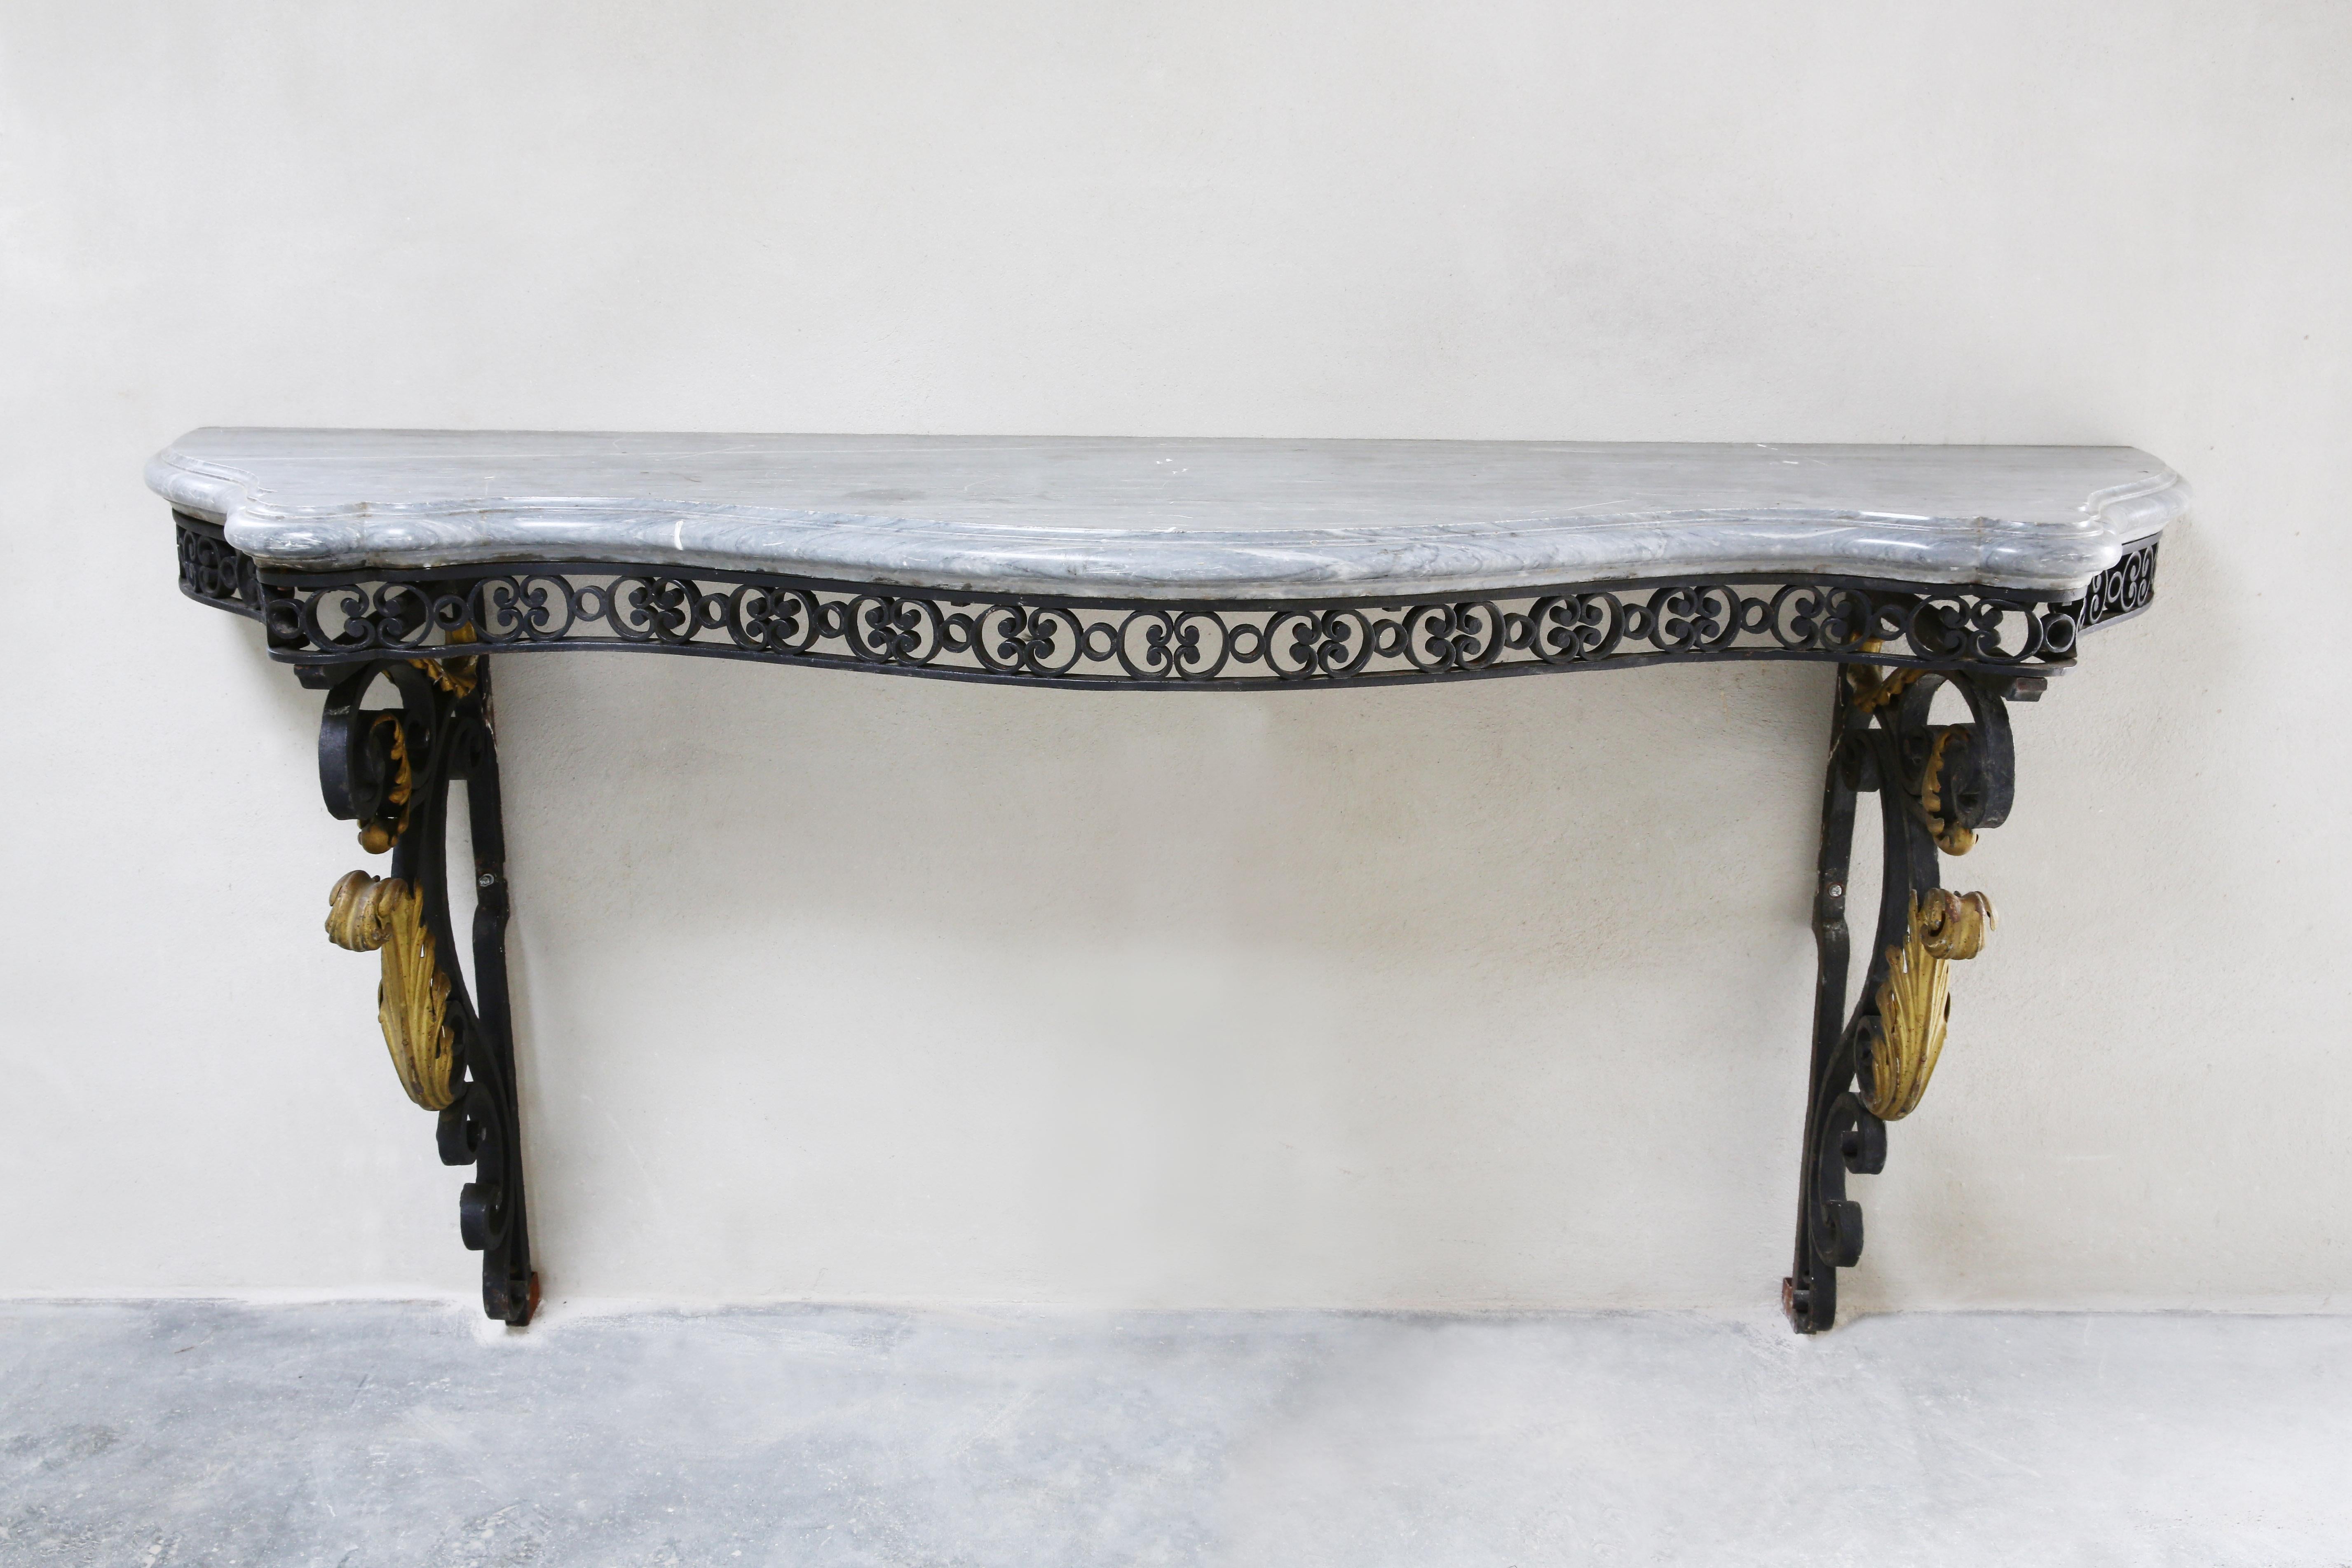 Beautiful exclusive antique side table from the 19th century in Baroque style. The base is beautifully decorated with gilded gold and black iron. The top consists of Turquin marble! A chic combination.